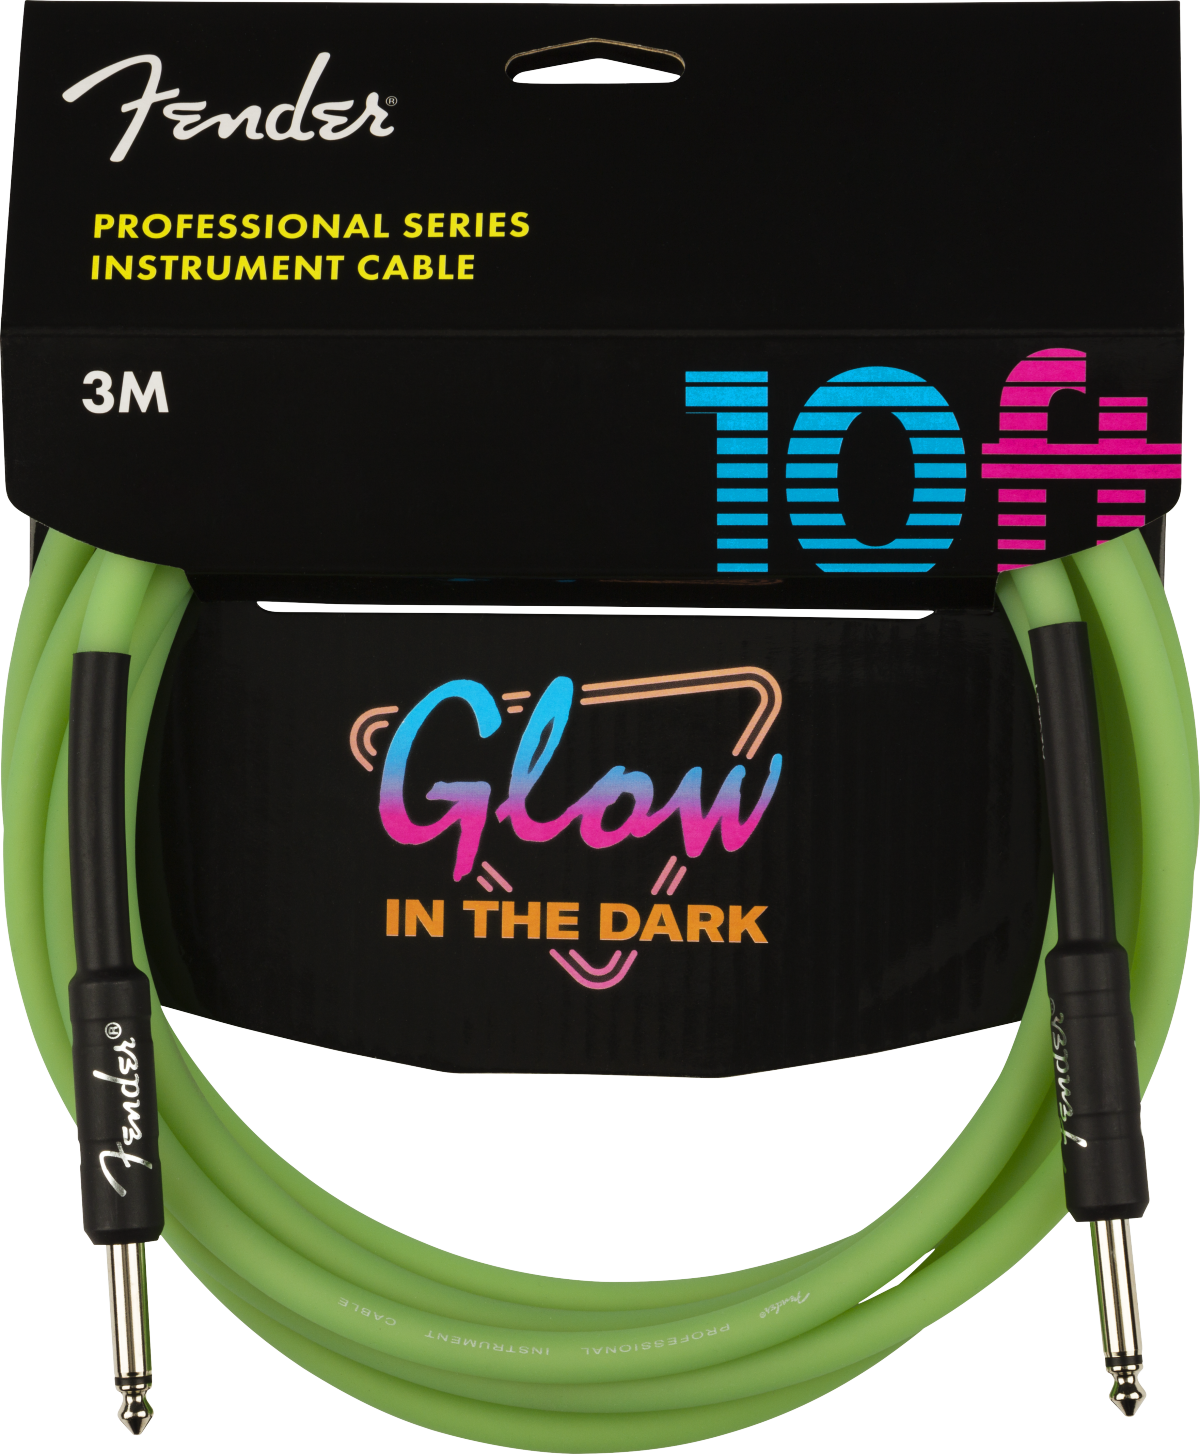 Fender Pro Glow In The Dark Instrument Cable Droit/droit 10ft Green - Kabel - Variation 1